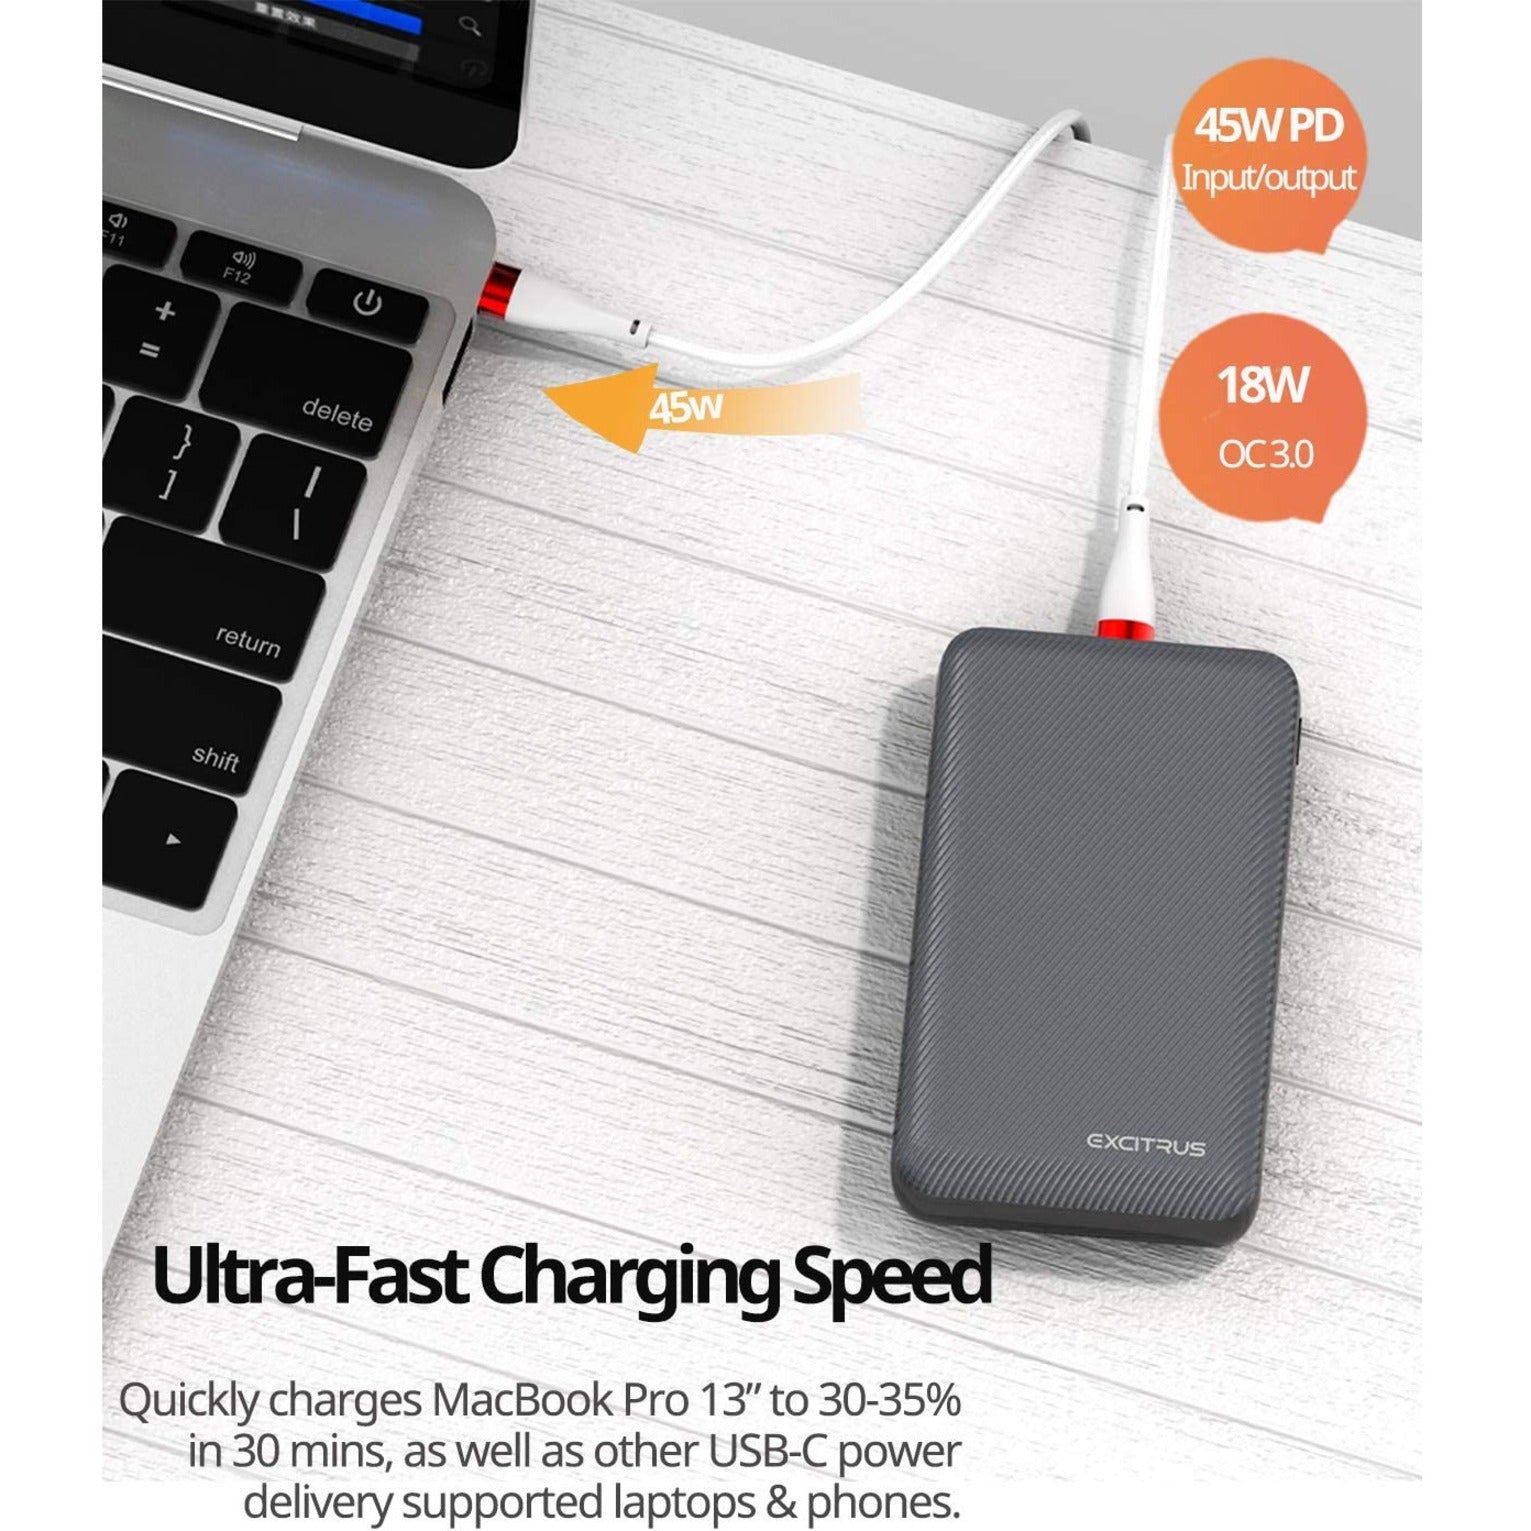 EXCITRUS PD-45960 45W Power Bank Air, Fast Charging Laptop Power Bank